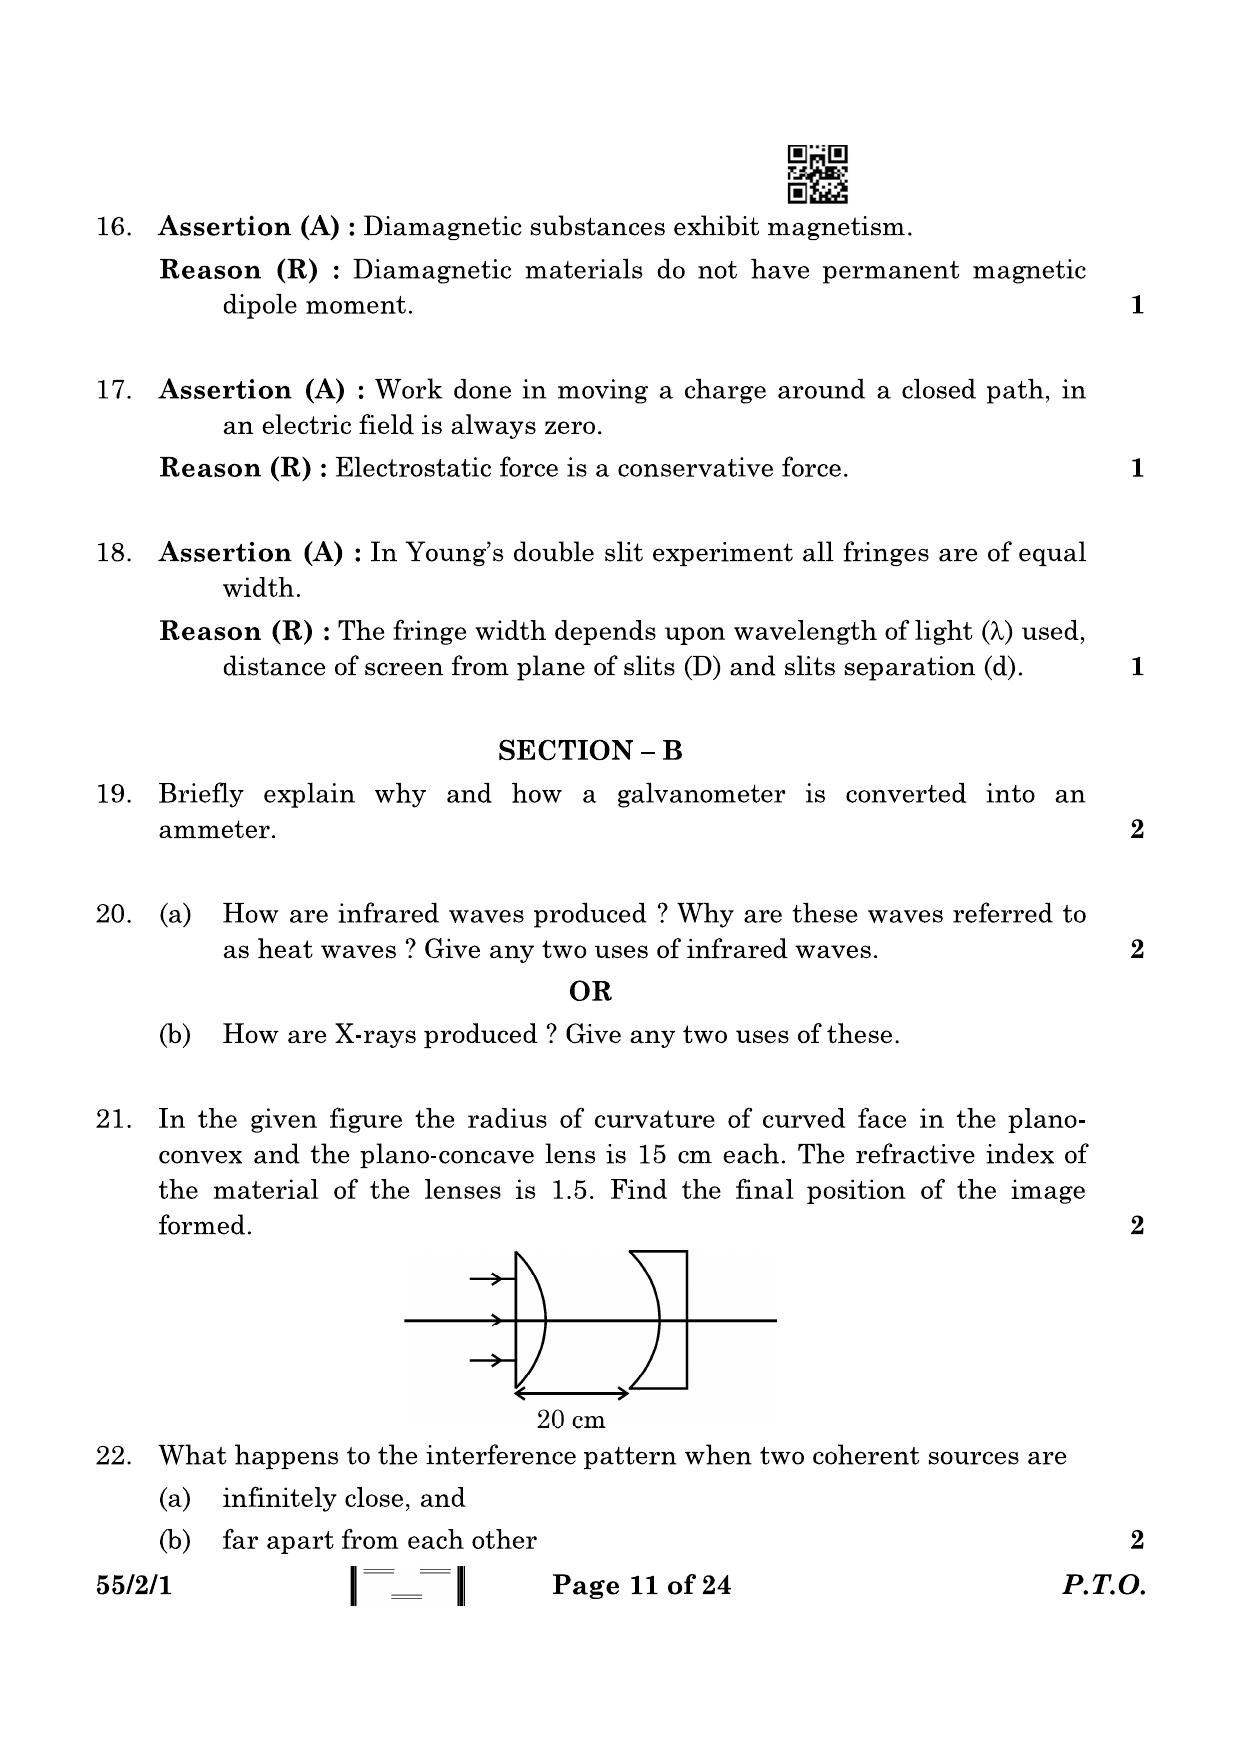 CBSE Class 12 55-2-1 Physics 2023 Question Paper - Page 11